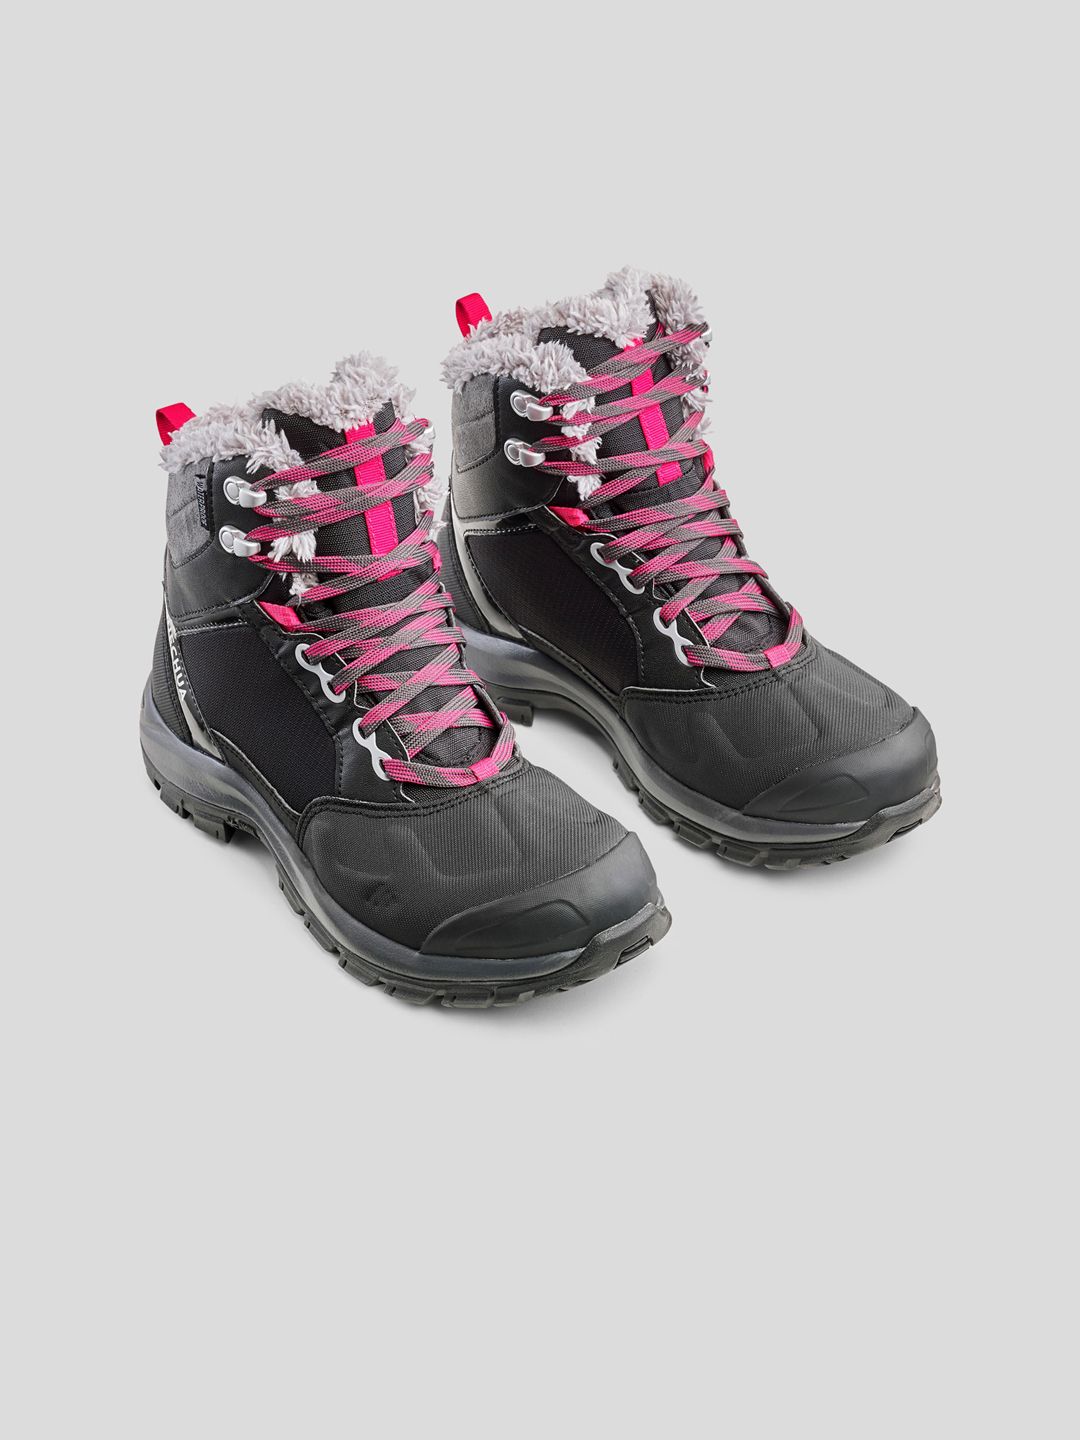 Quechua By Decathlon Women Black High Top Waterproof Snow Shoes Price in India